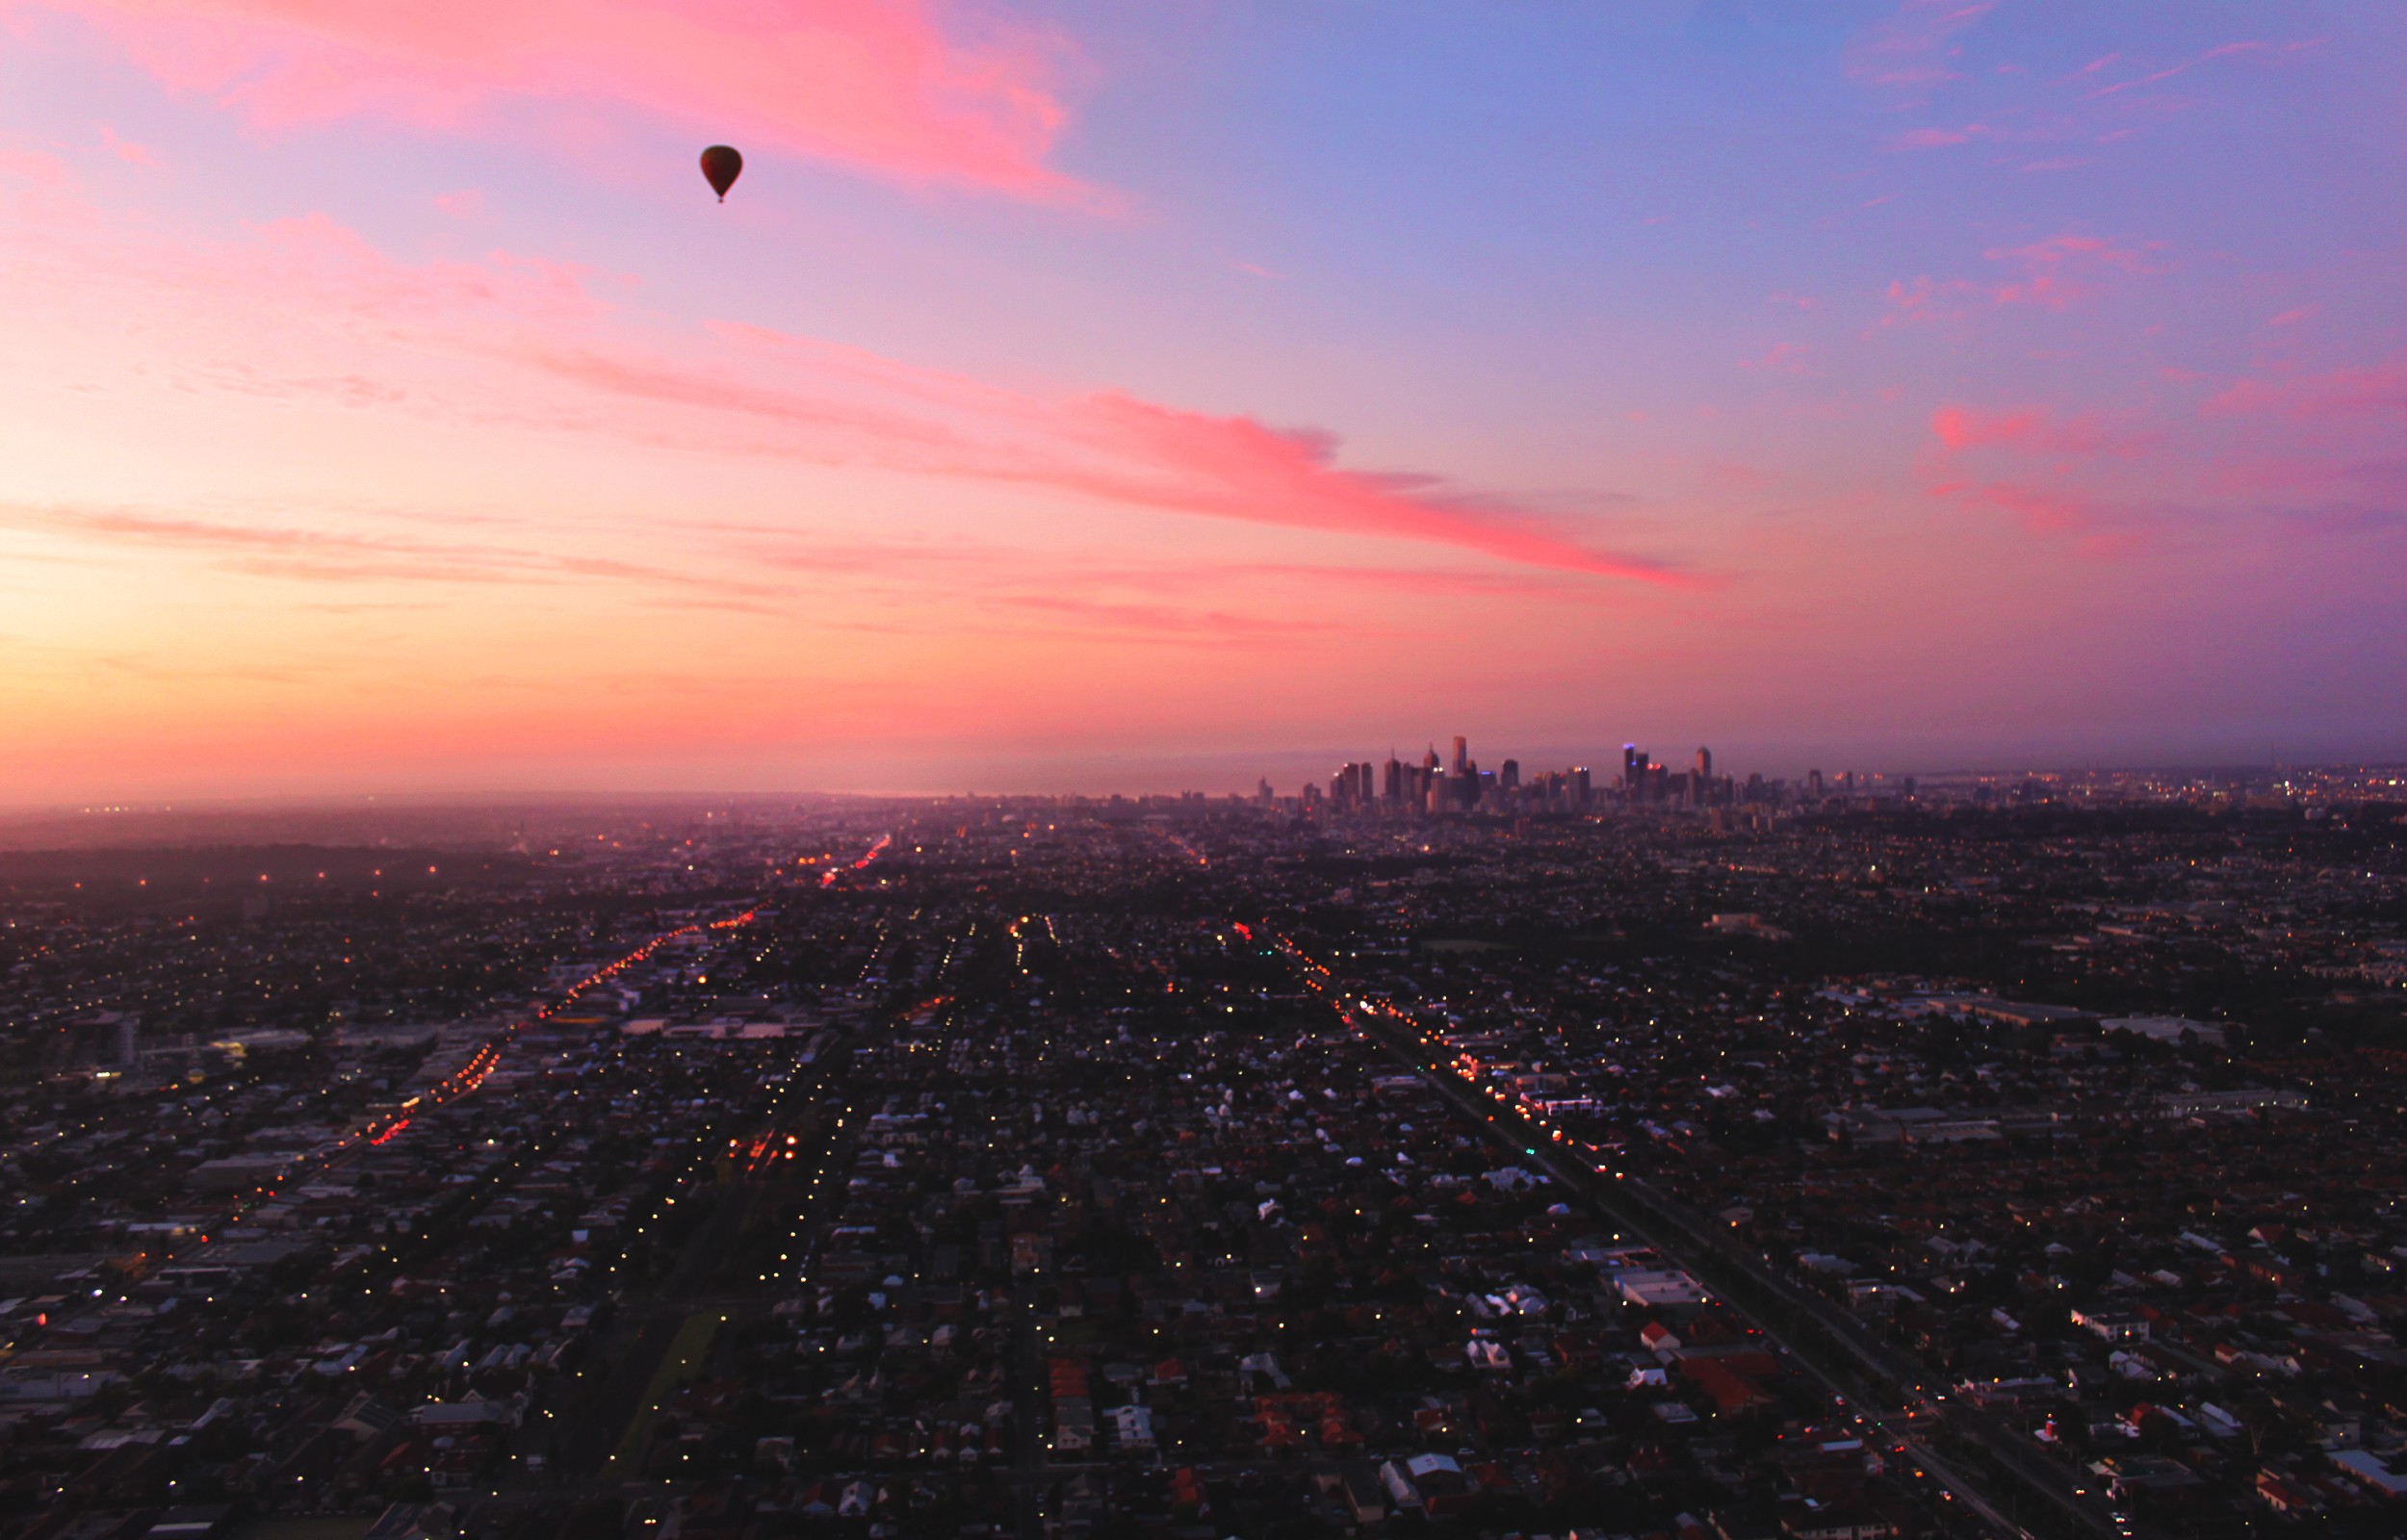 General 2500x1600 landscape cityscape aerial view hot air balloons sky sunlight clouds